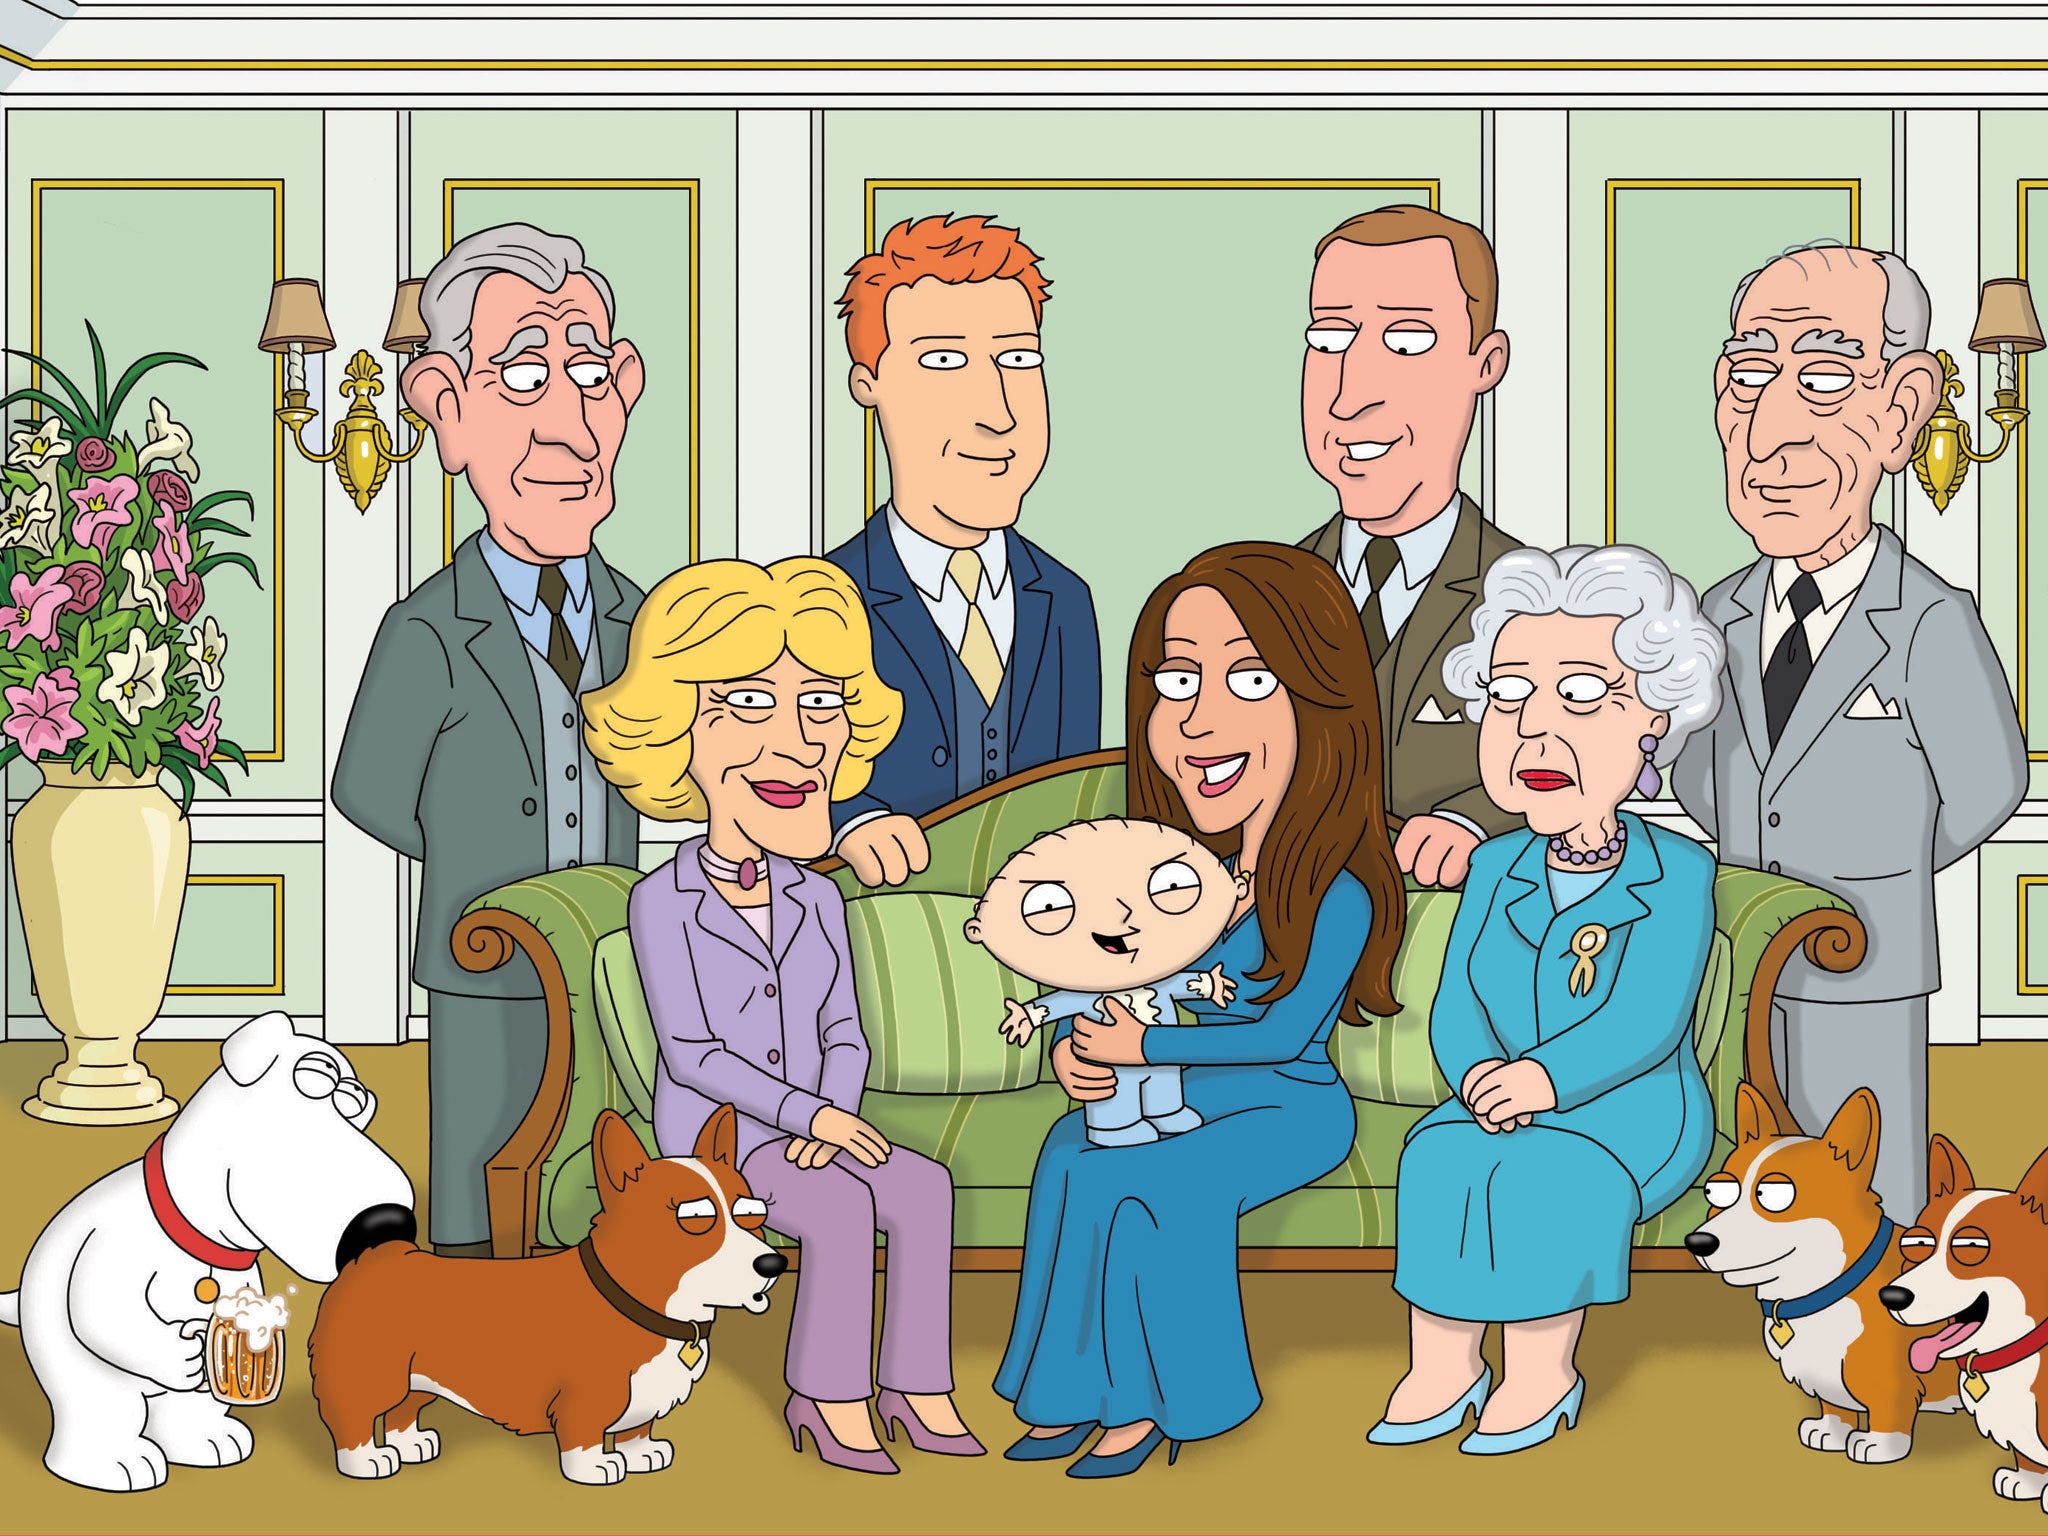 Family Guy spoofs the royal christening, with the cherubic Prince George replaced by the demonic Stewie